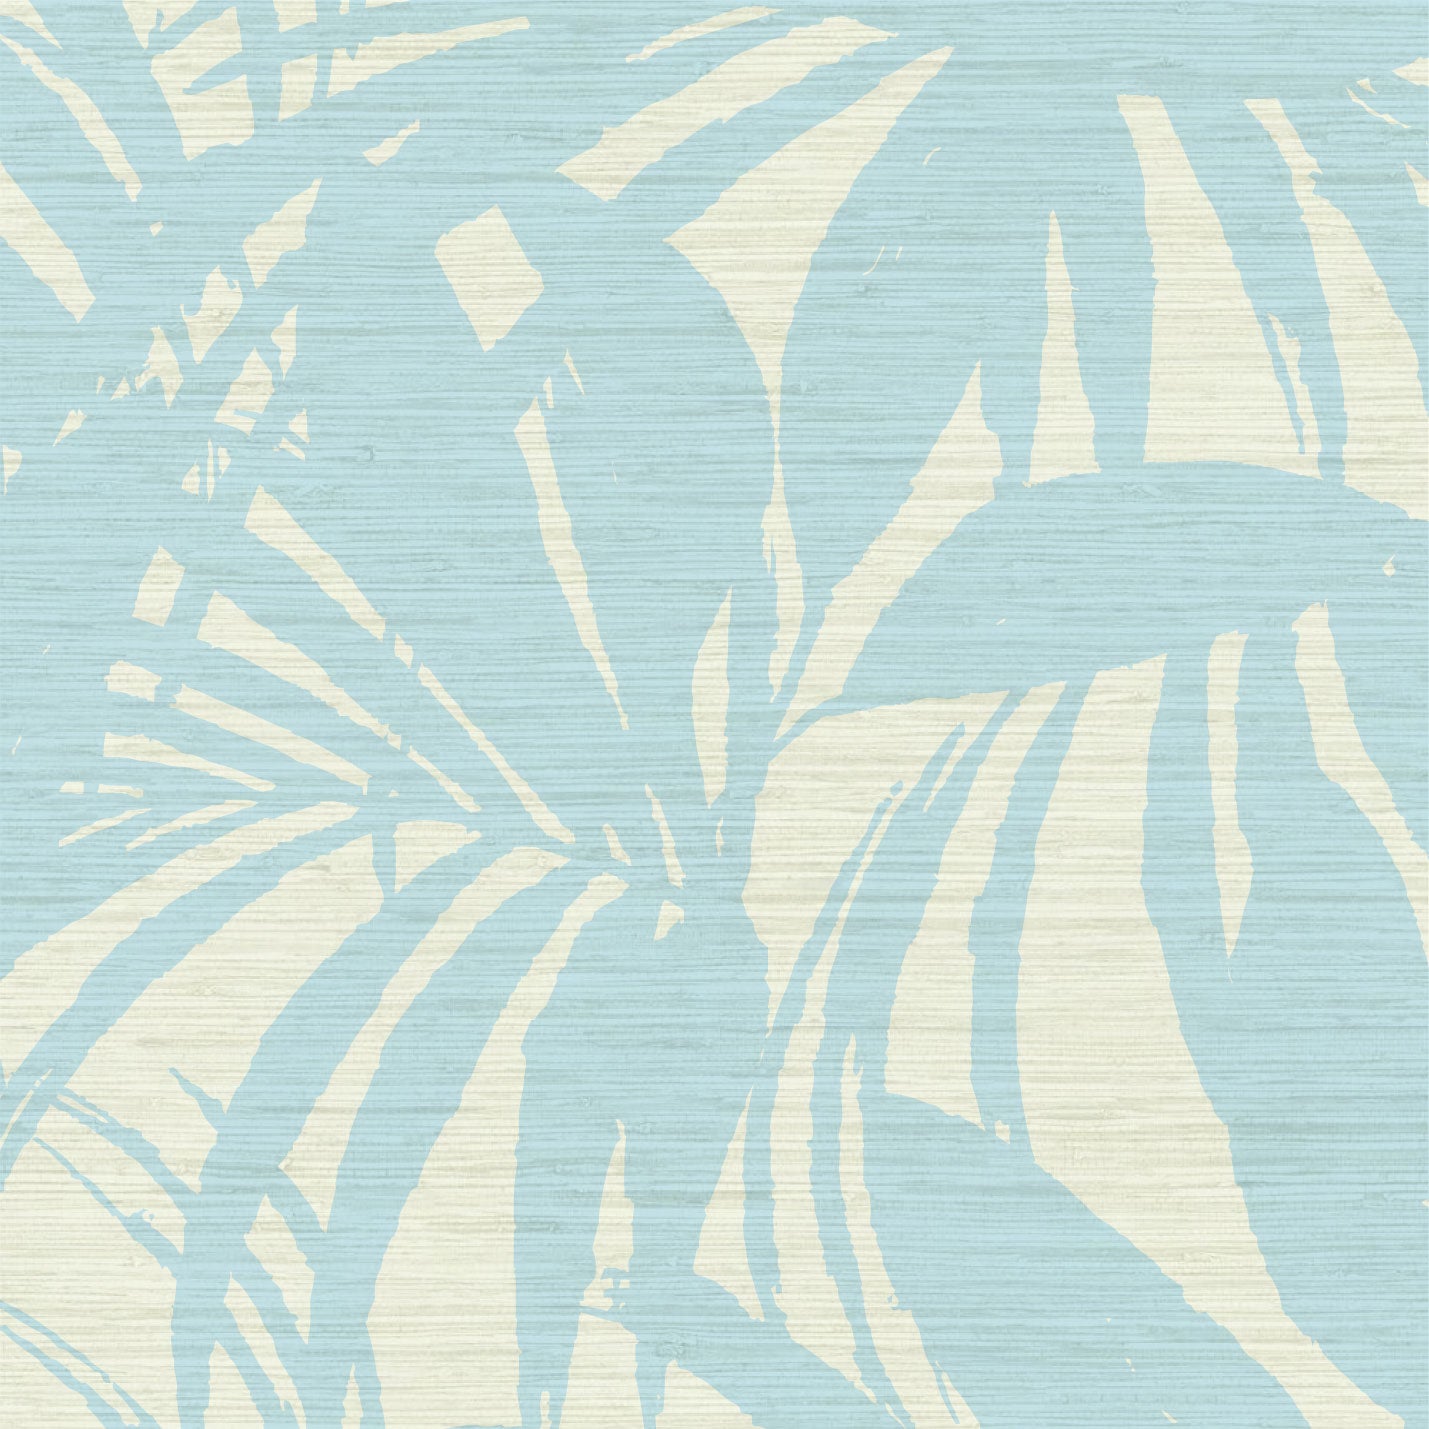 Load image into Gallery viewer, printed grasscloth wallpaper oversize tropical leaf Natural Textured Eco-Friendly Non-toxic High-quality  Sustainable practices Sustainability Interior Design Wall covering Bold retro chic custom jungle garden botanical Seaside Coastal Seashore Waterfront Vacation home styling Retreat Relaxed beach vibes Beach cottage Shoreline Oceanfront white peach pink coral pastel blue ocean sky 
